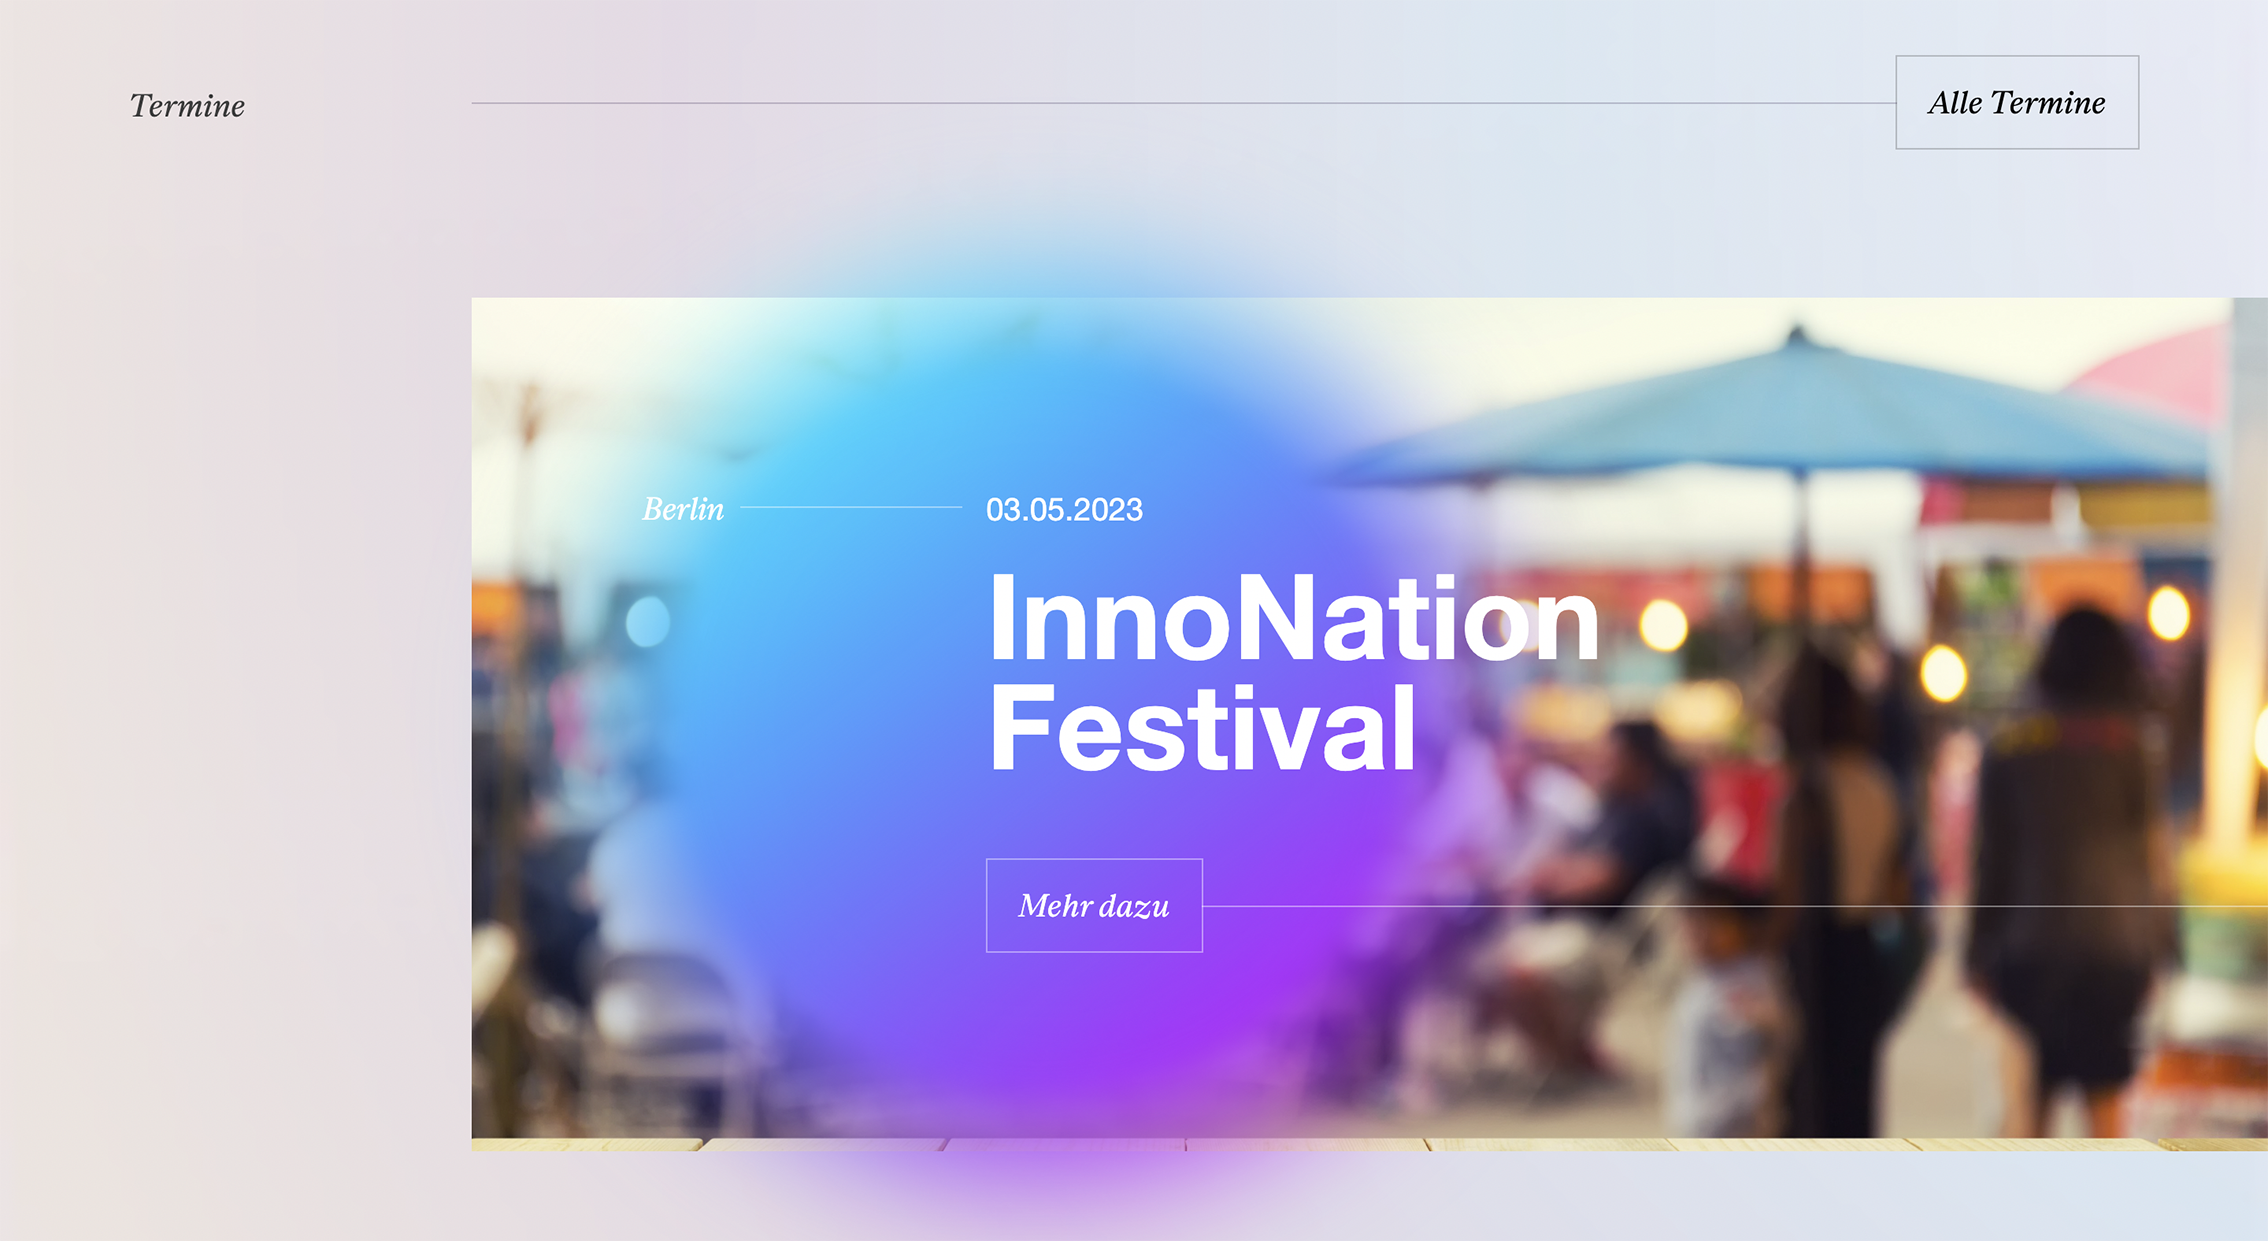 The section for events. A large but blurred image in the background. Ontop a blurry bubble with a gradient from cold blue to violet with the tiny description: Berlin, 03.05.2023 and the huge headline: InnoNation Festival and a button to read more.